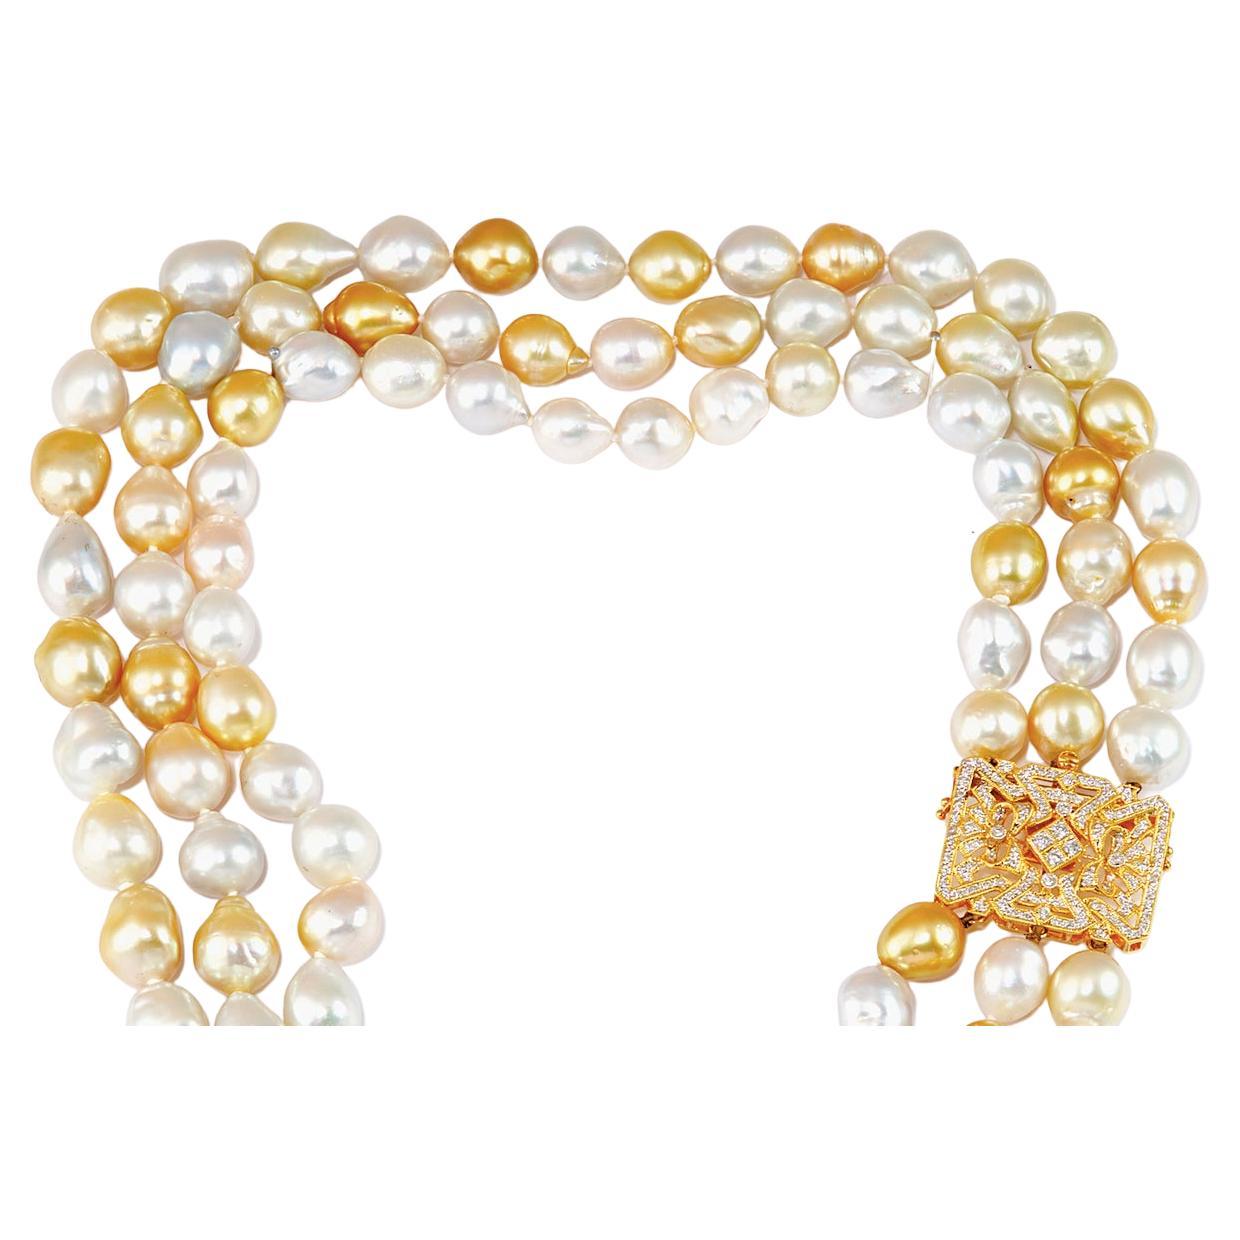 Olympus Art Certified,
18K Yellow Gold
0.92 ct. Diamond Round
South Sea Pearl Baroque
